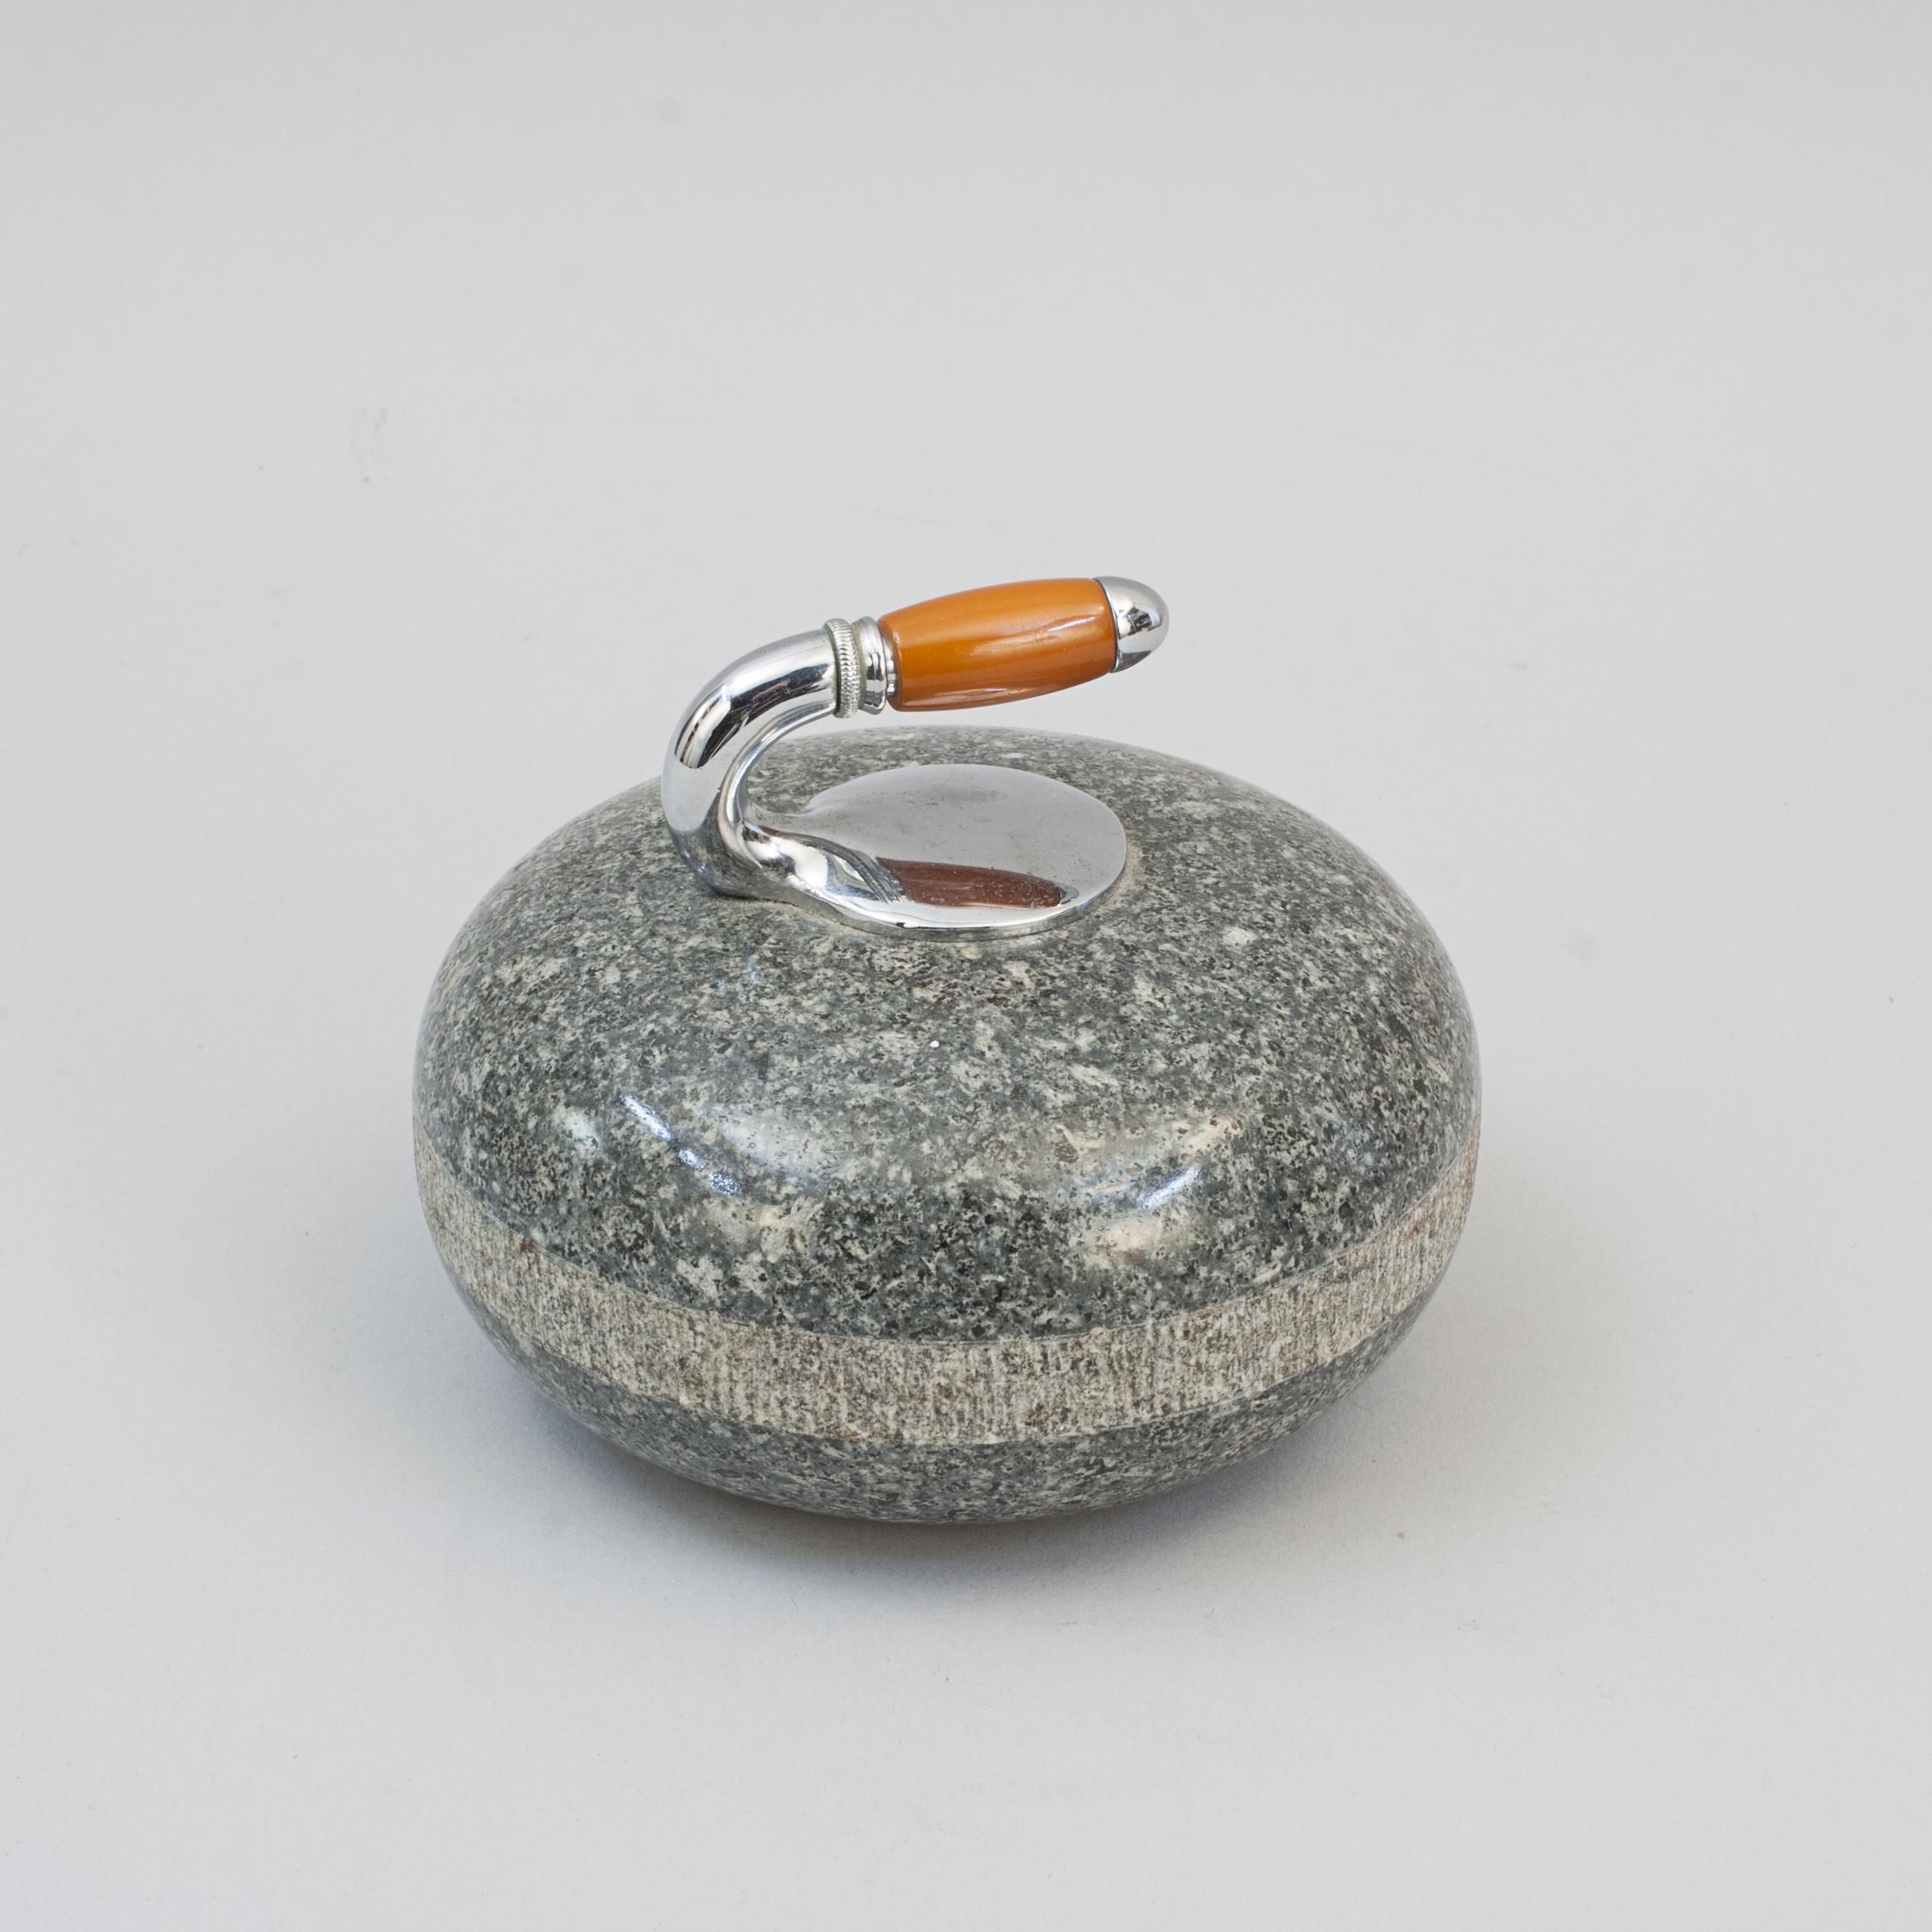 curling stone paperweight